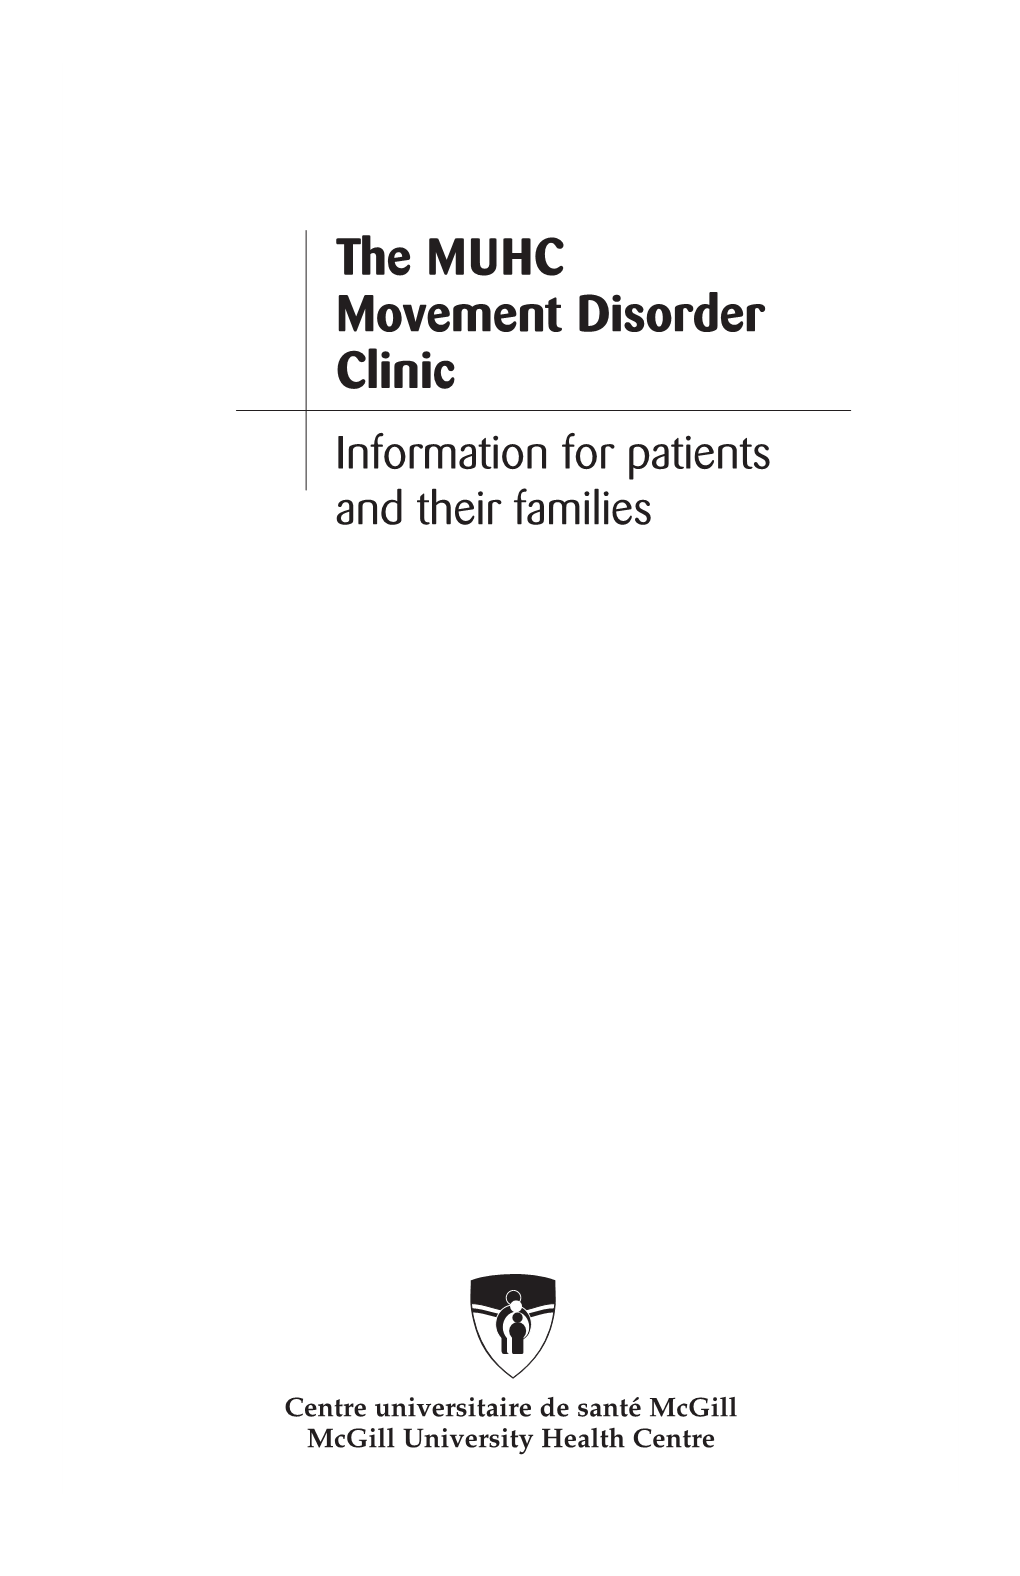 The MUHC Movement Disorder Clinic Information for Patients and Their Families